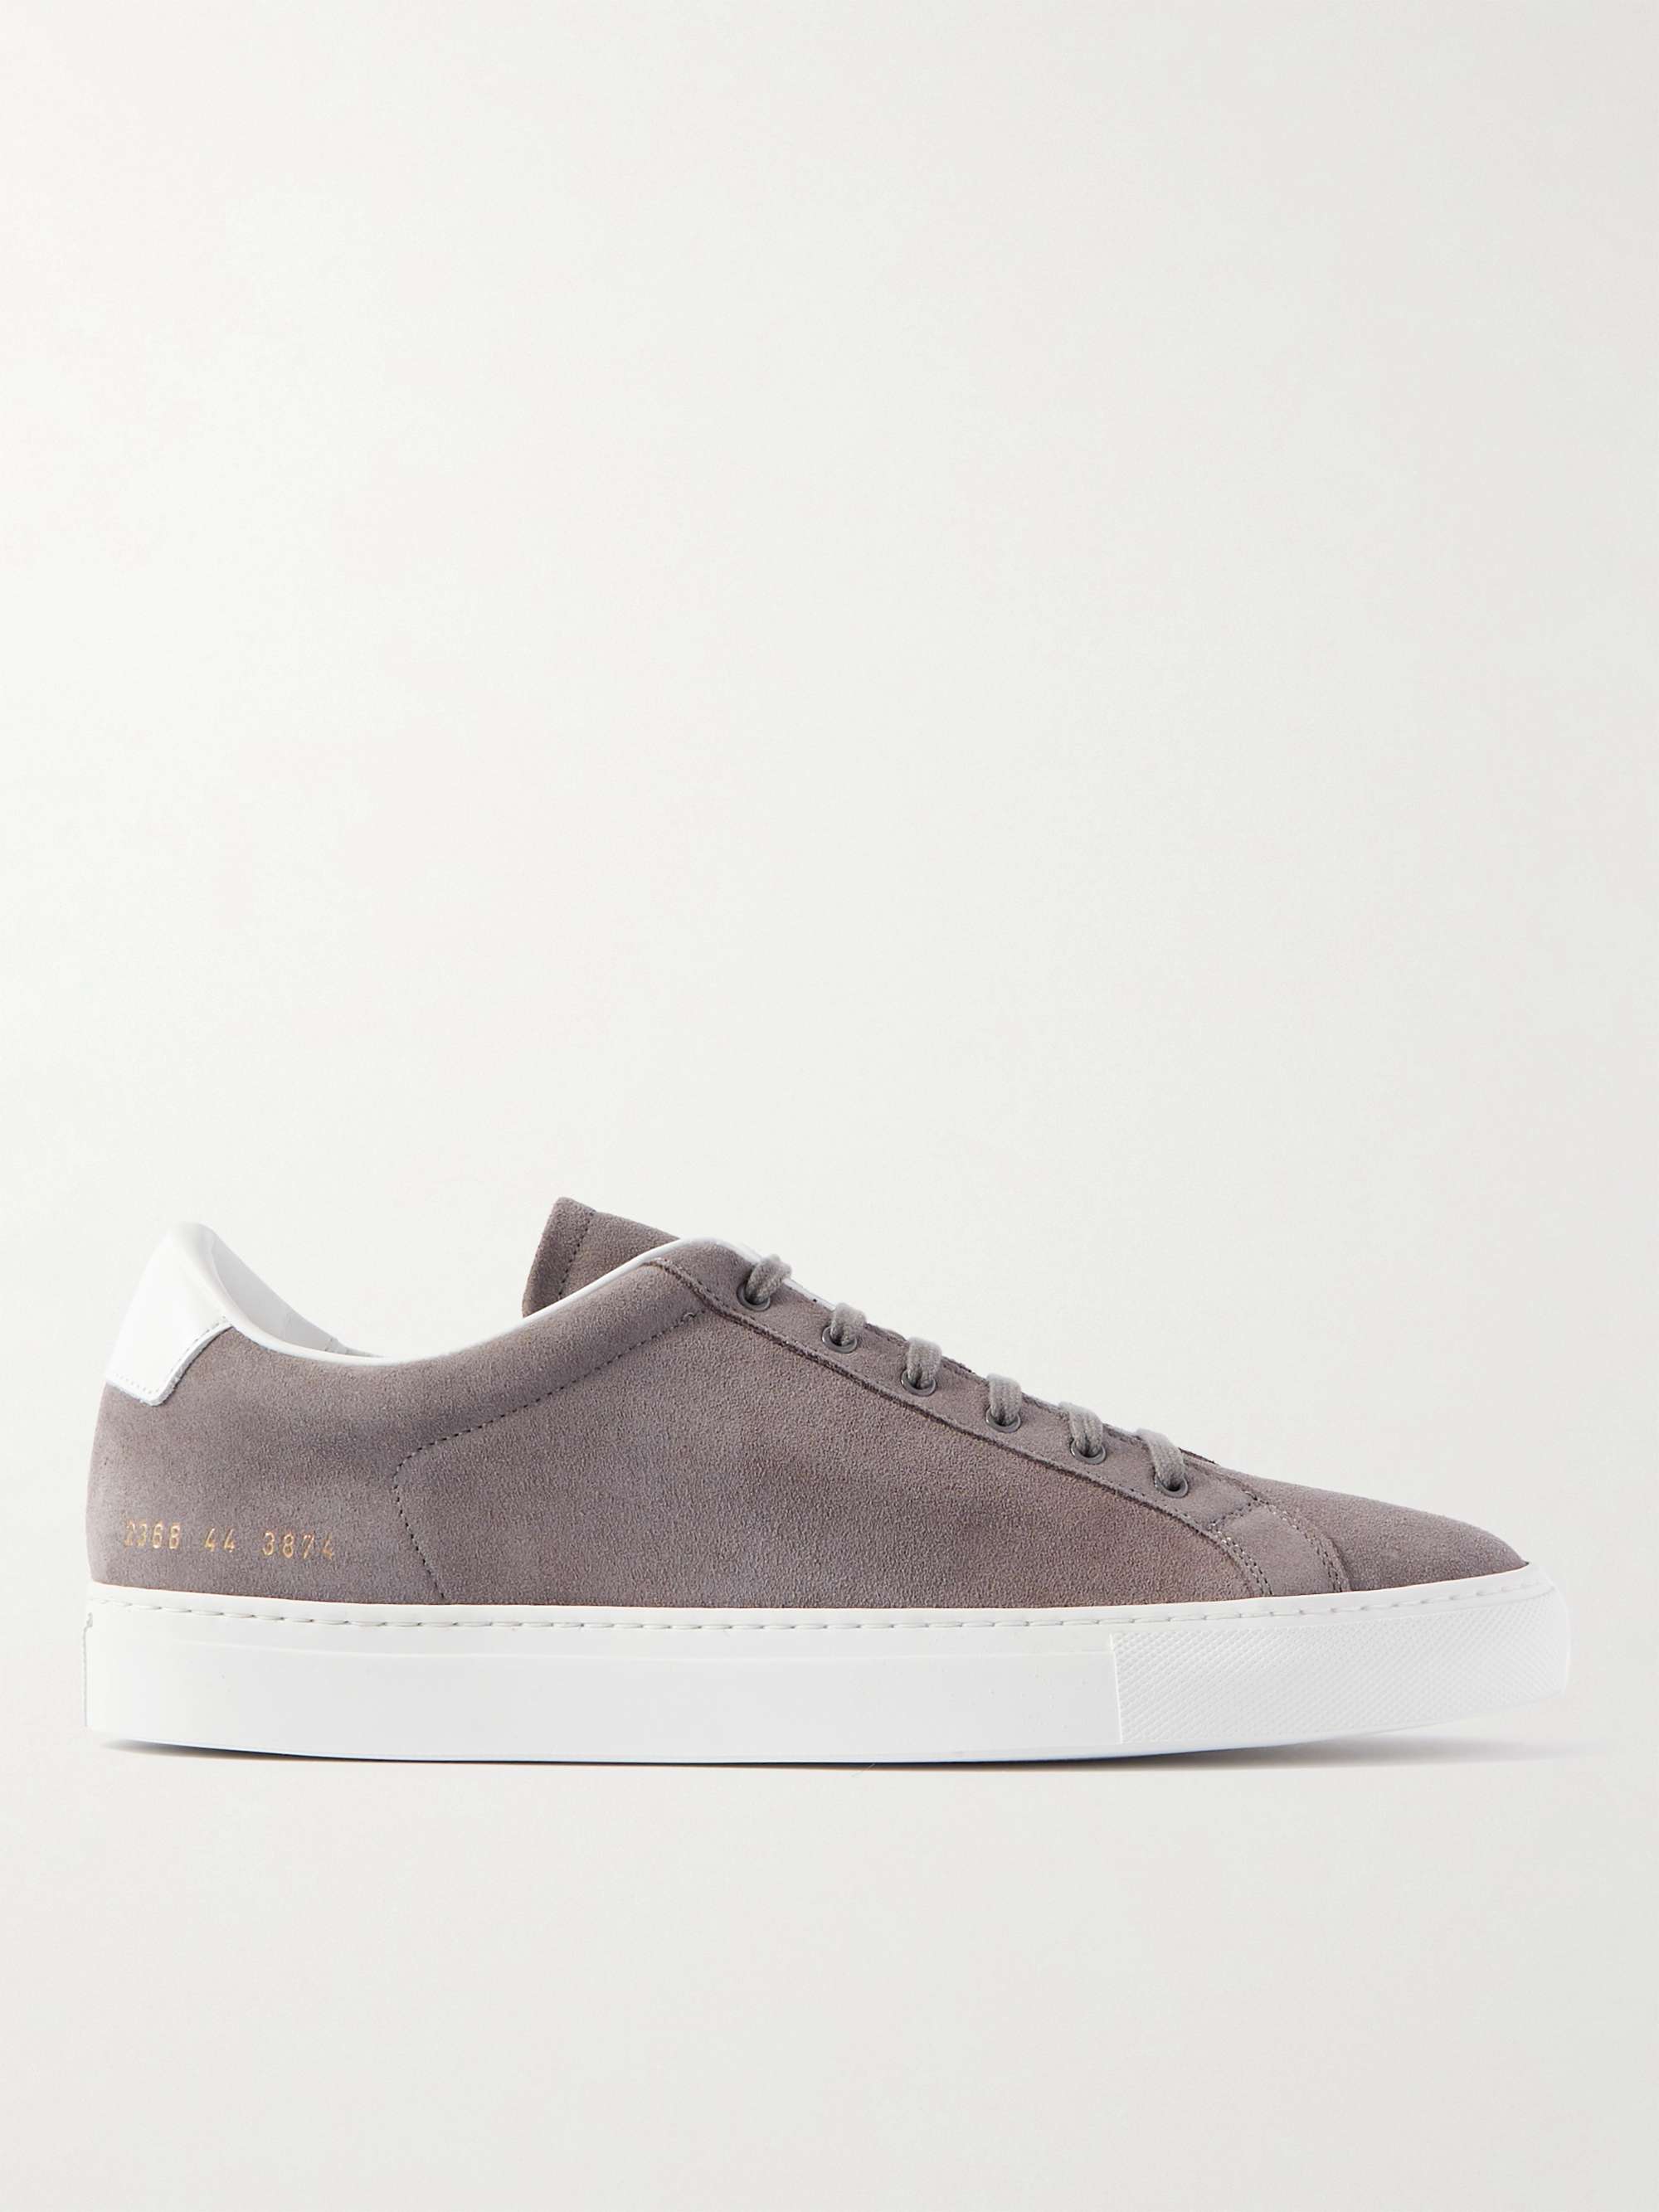 COMMON PROJECTS Retro Low Leather-Trimmed Suede Sneakers MR PORTER